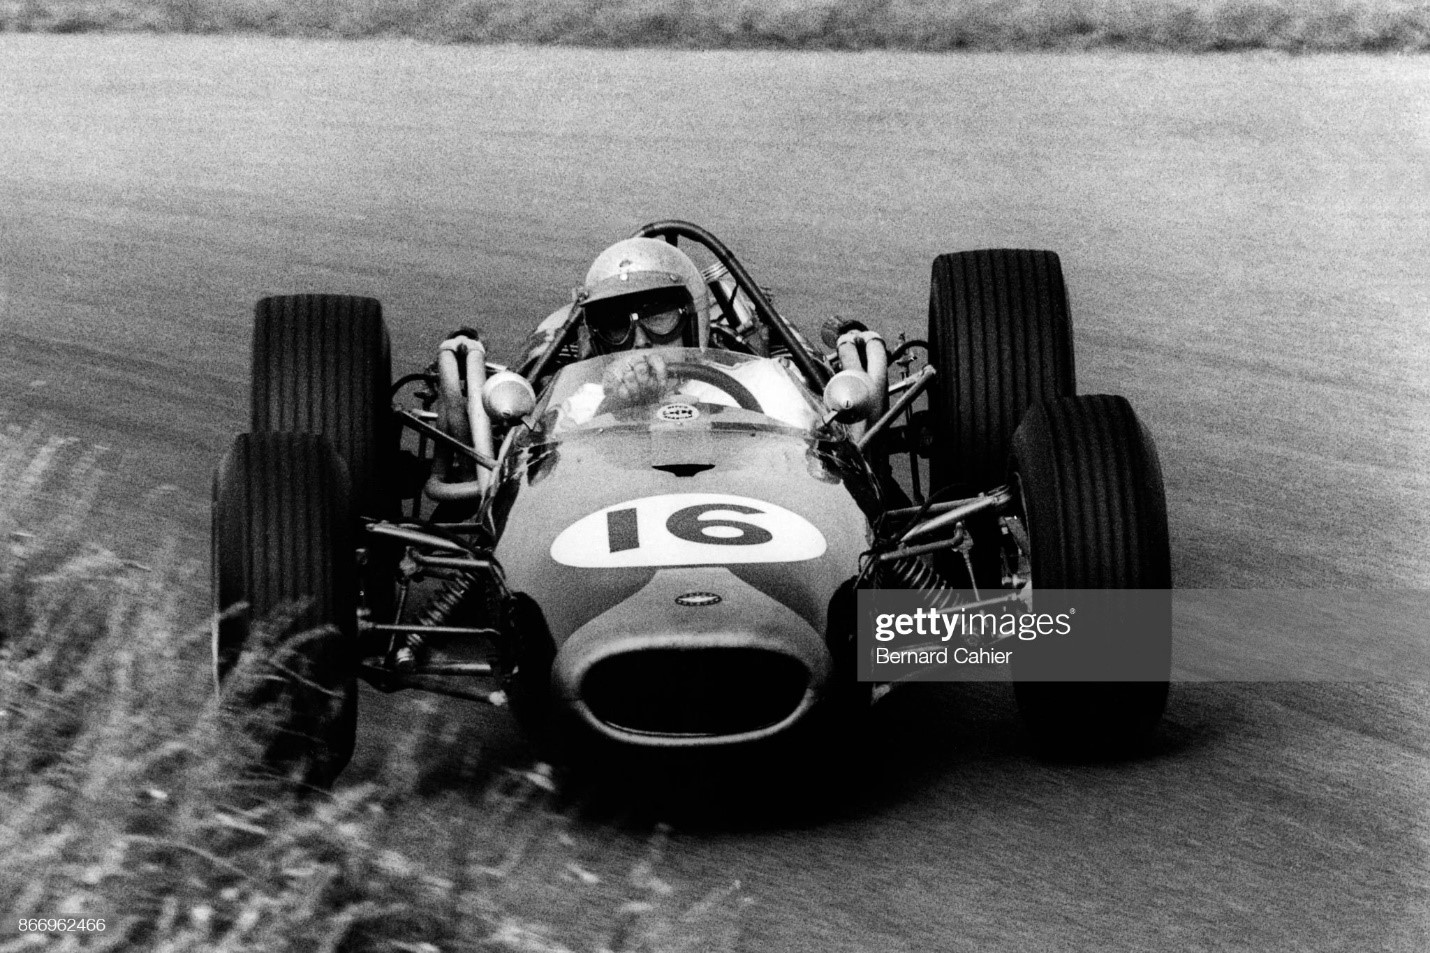 A magnificent four wheel drift for Jack Brabham in the famous Tarzan curve on the Zandvoort circuit during the 1966 Grand Prix of Netherlands.